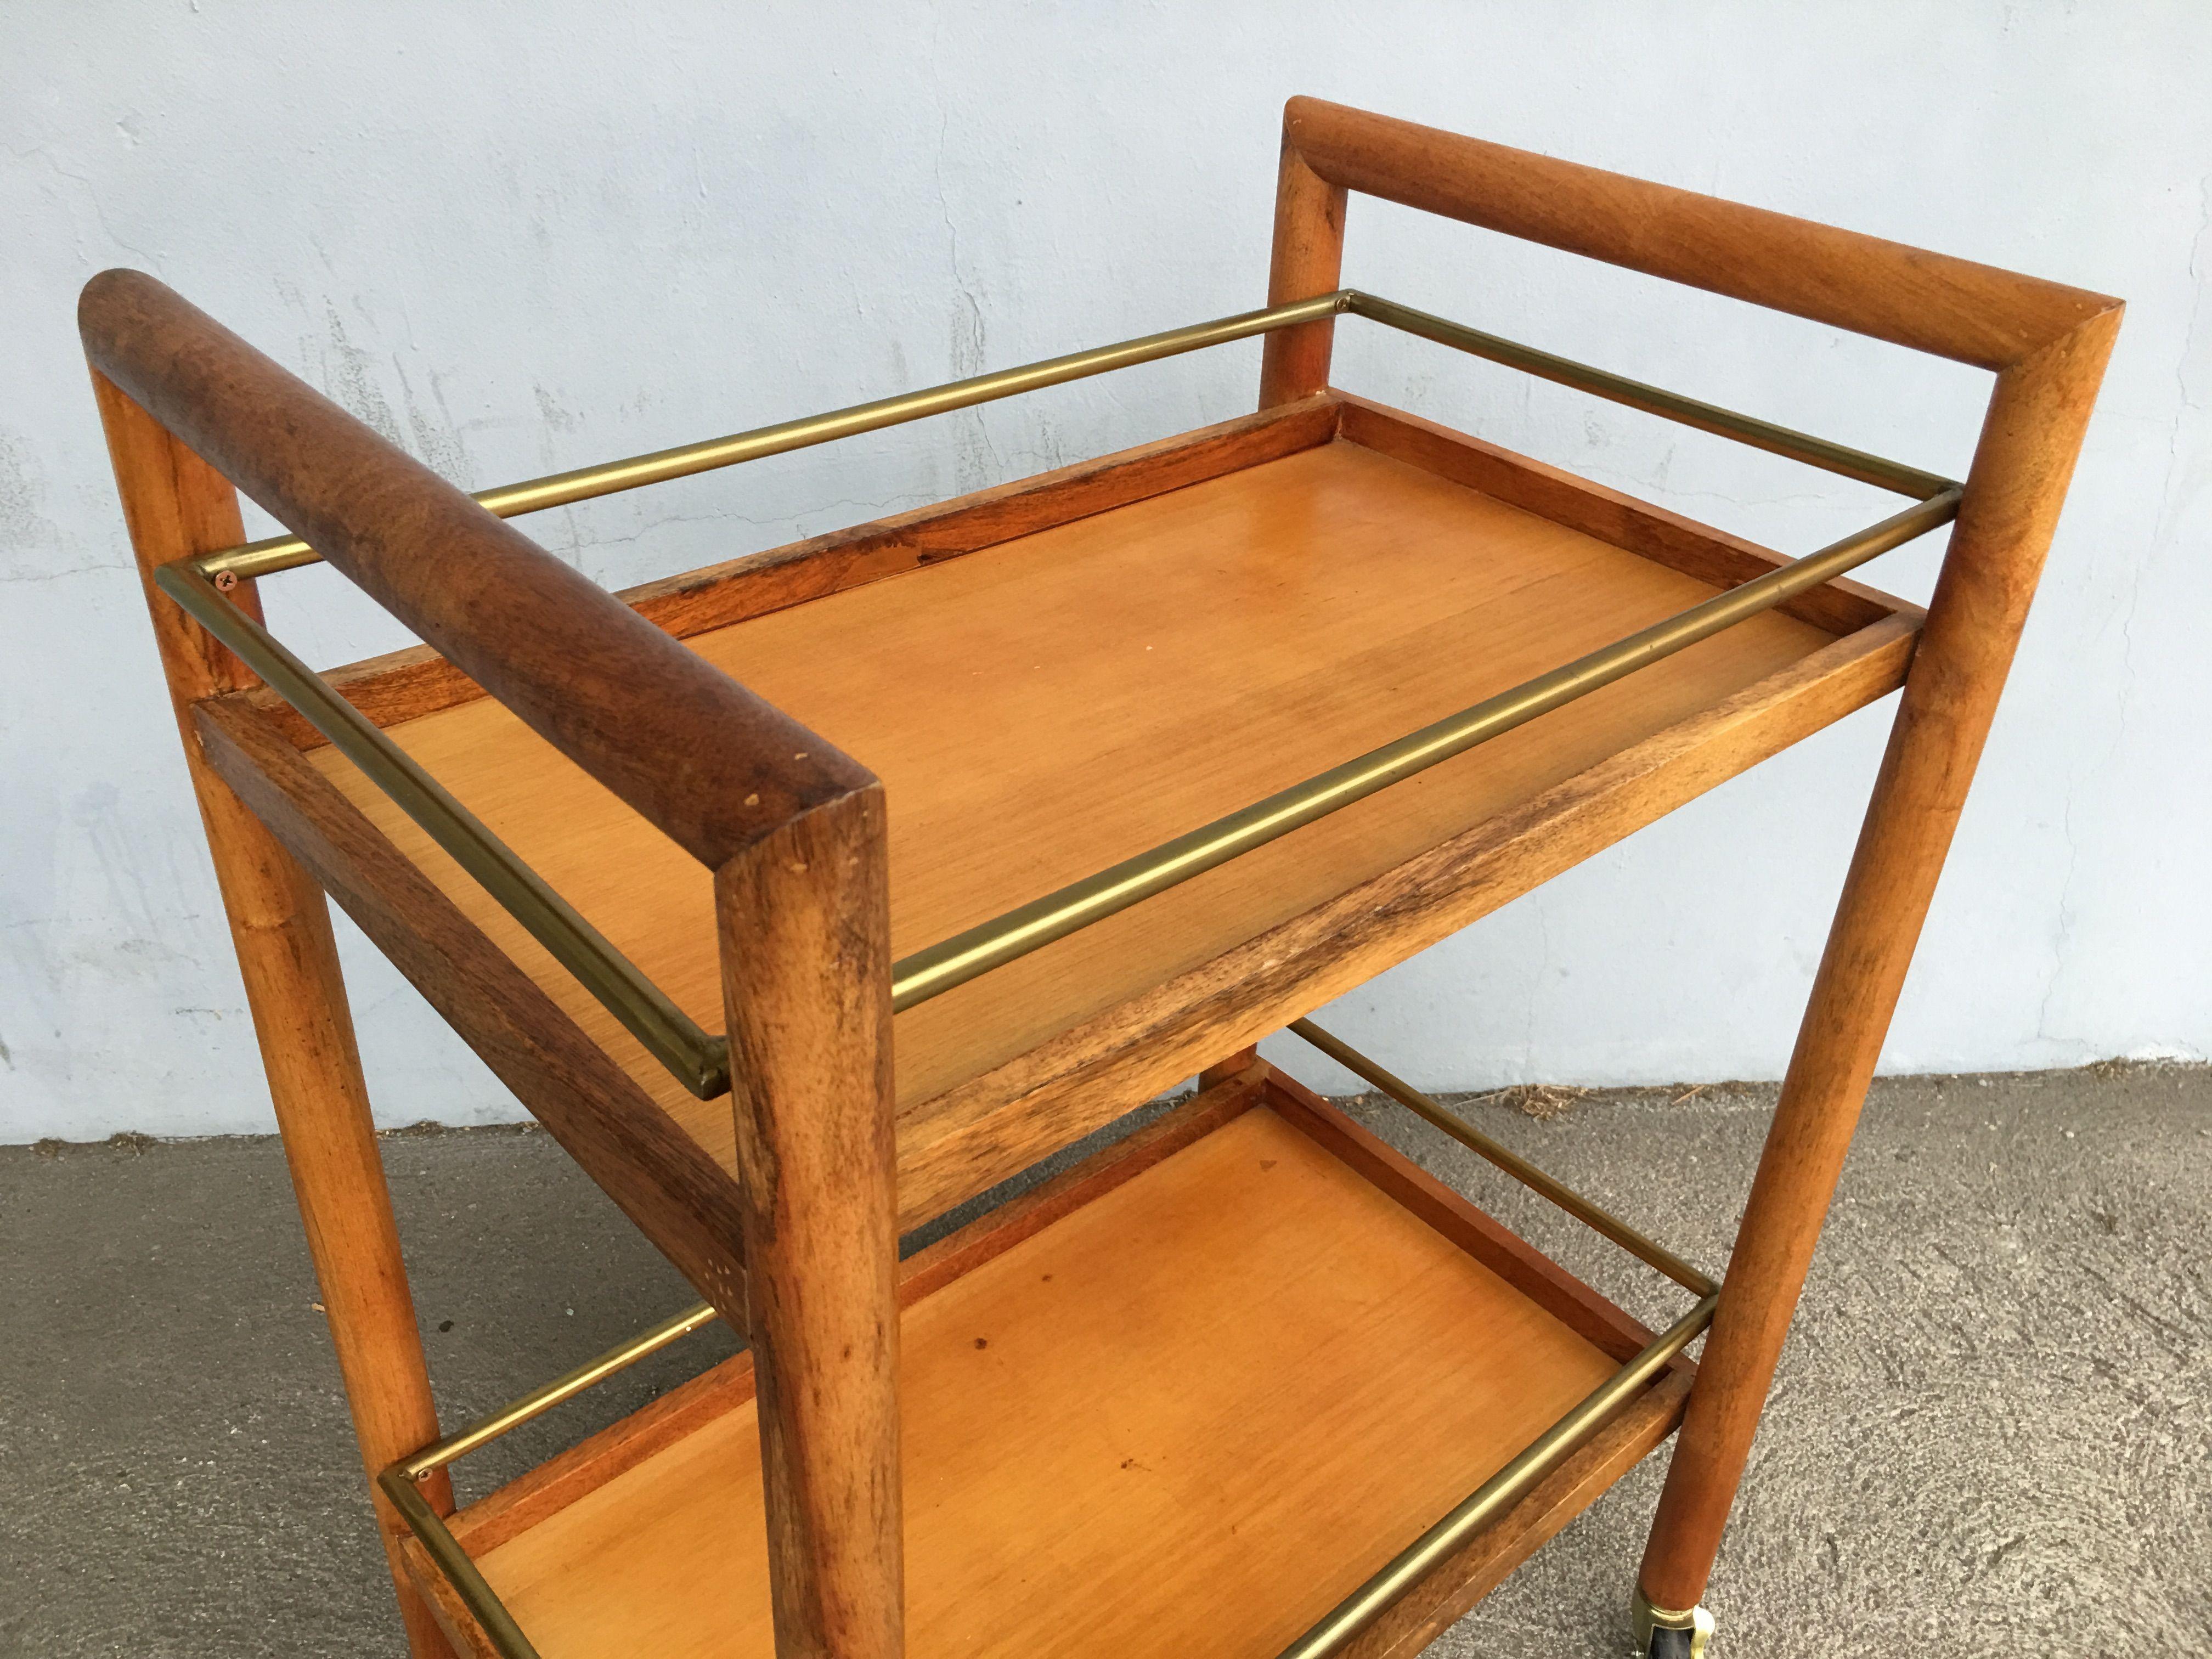 Dark blond two-tier midcentury bar cart with round-shaped side frames. The cart features brass railings with four brass coaster wheels, two lock to keep cart from moving. Reminiscent of the design styling made popular by the Heywood Wakefield